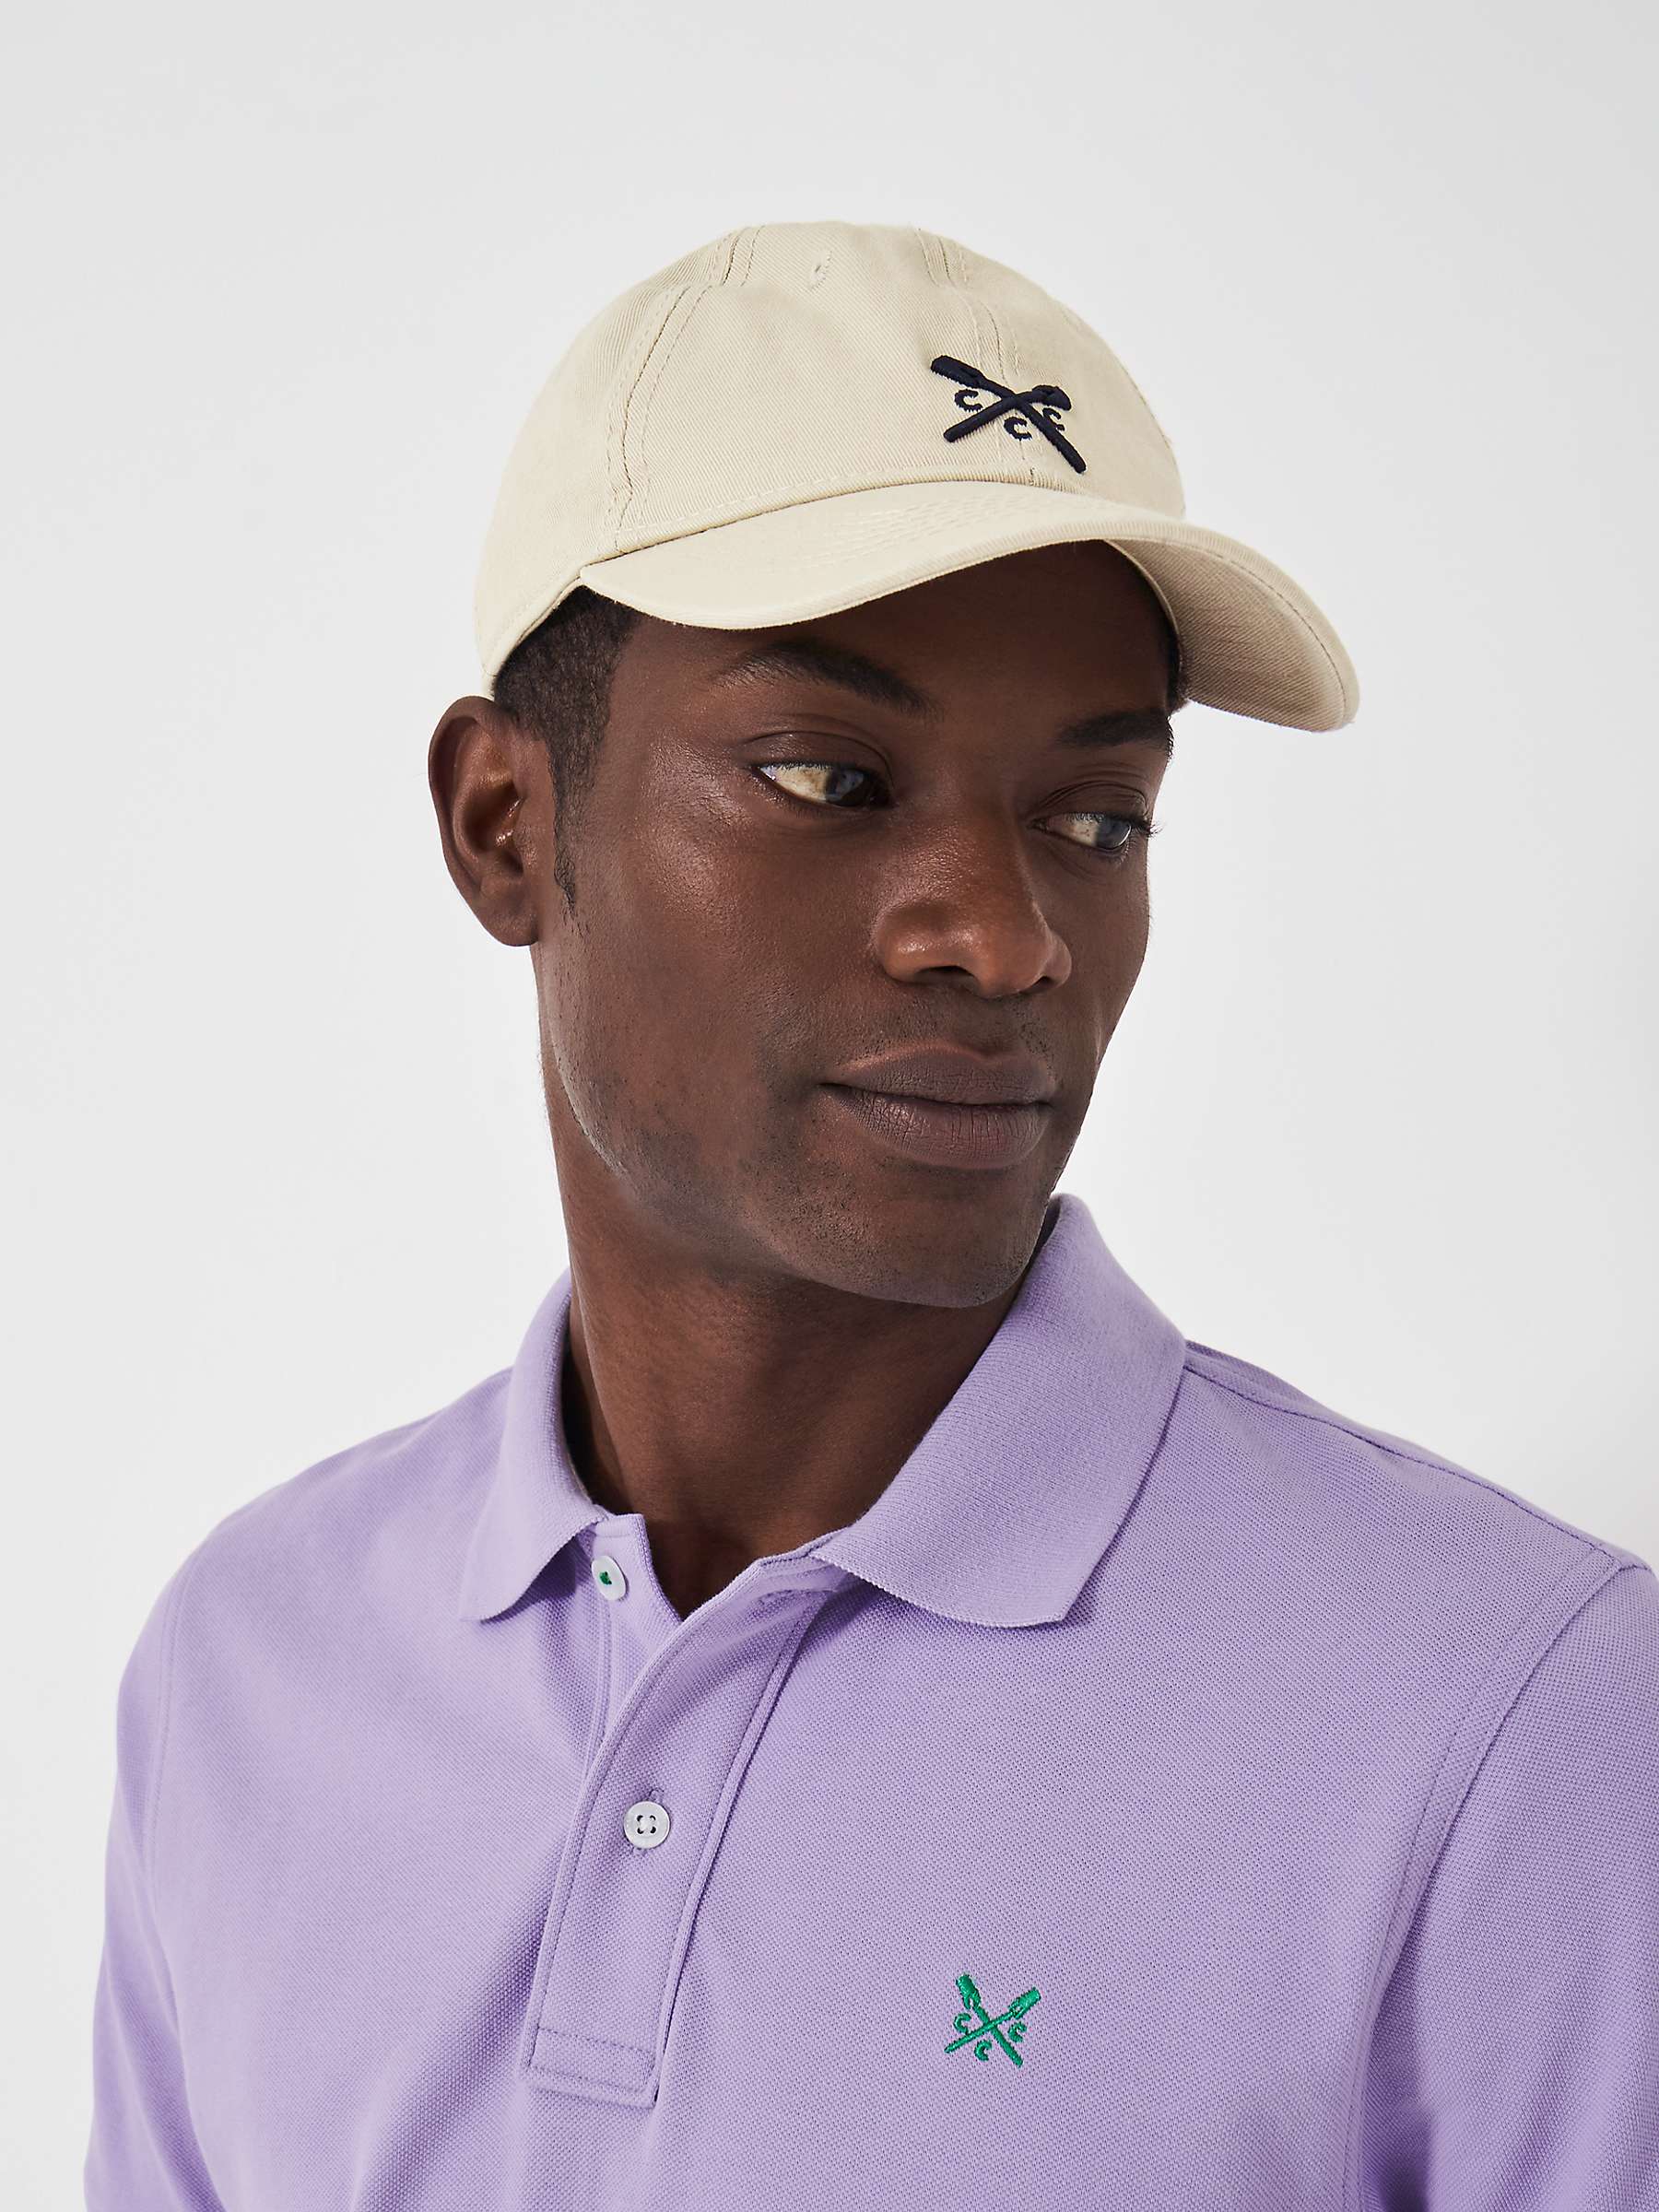 Buy Crew Clothing Embroidered Baseball Hat Online at johnlewis.com